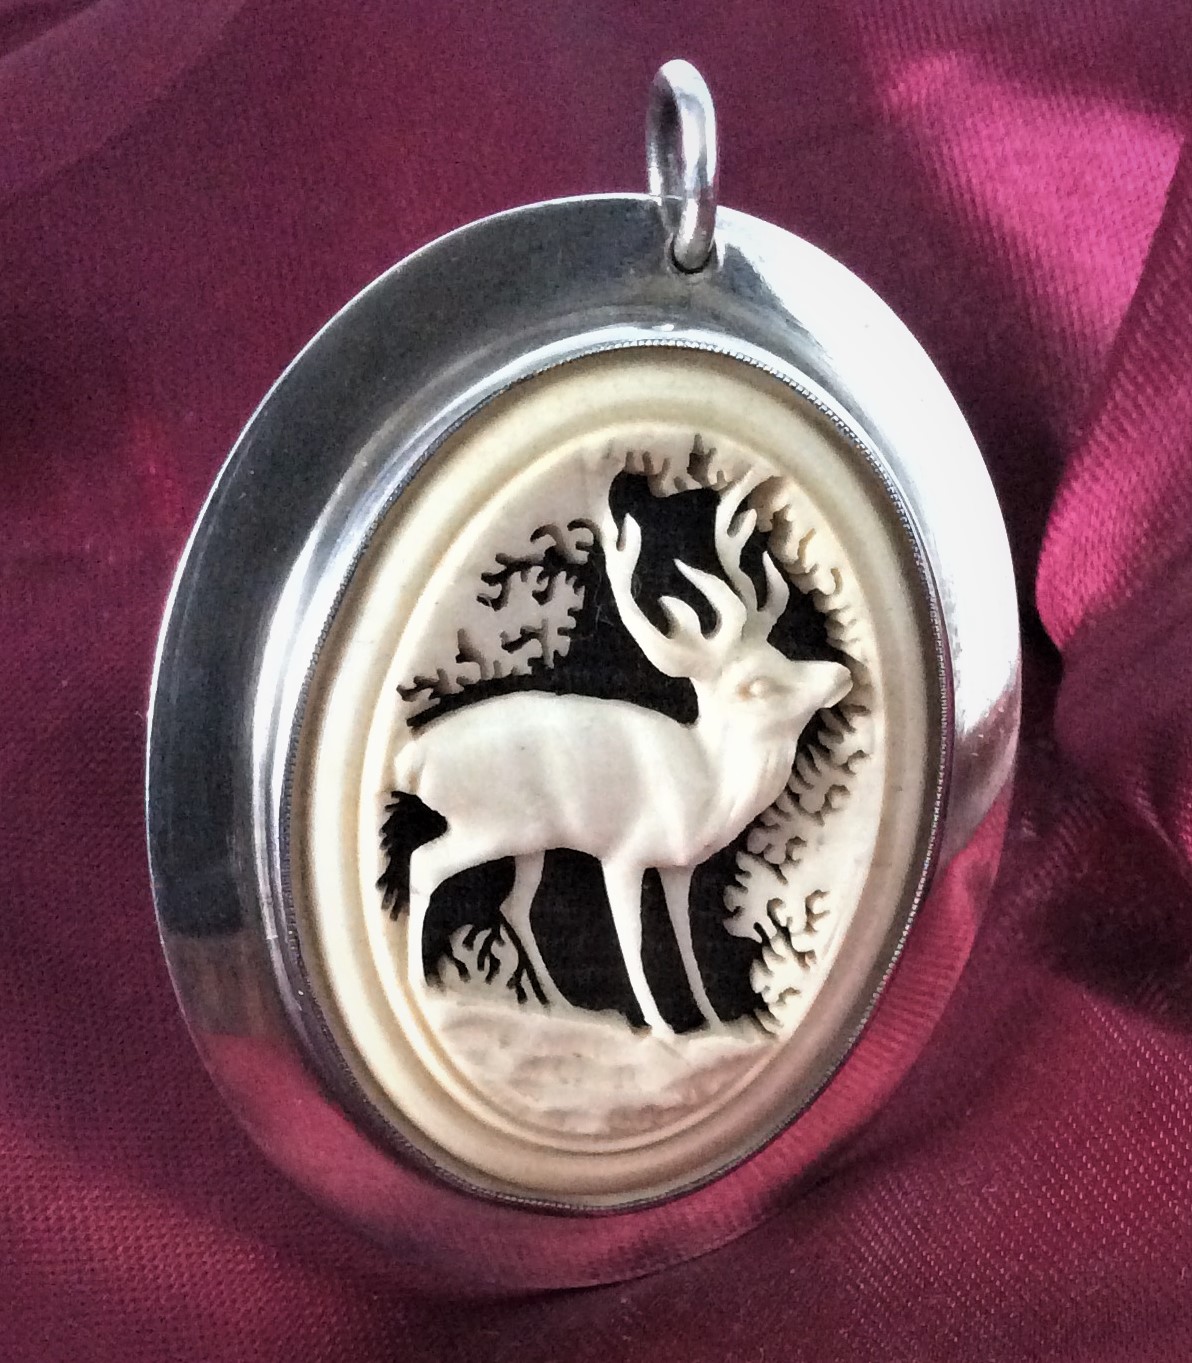  Antique Wonderful Winter Scene in Finely Carved Bovine with Stag inset. Mounted in Signed Sterling Silver Pendant Brooch weight 19g Size 4.7cm x 3.8cm 